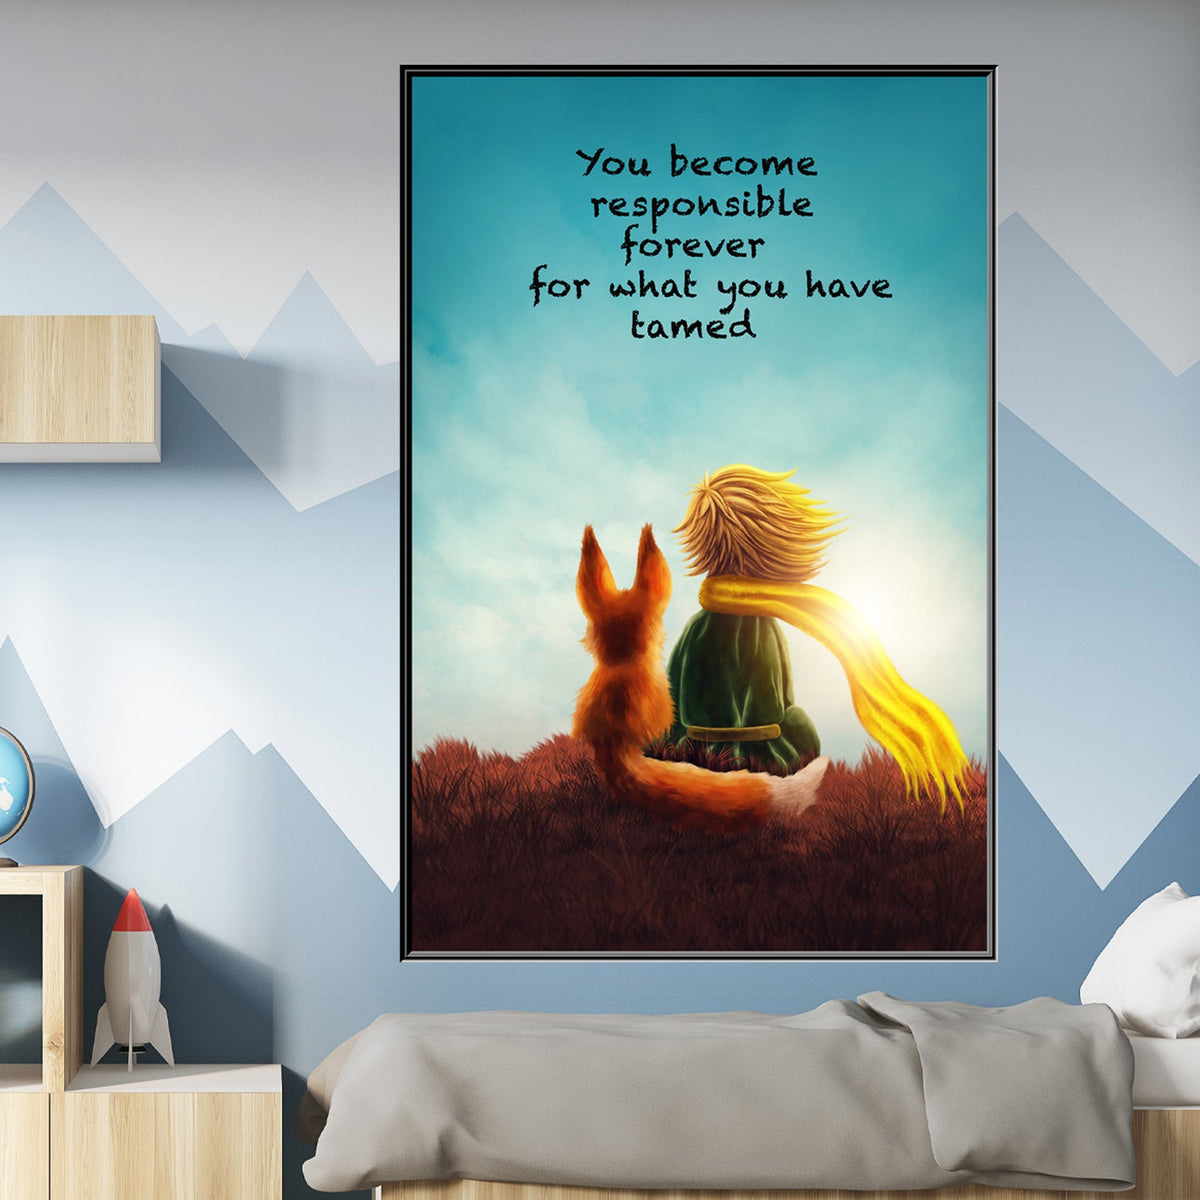 https://cdn.shopify.com/s/files/1/0387/9986/8044/products/TheFoxQuotefromTheLittlePrinceCanvasArtprintFloatingFrame-2.jpg